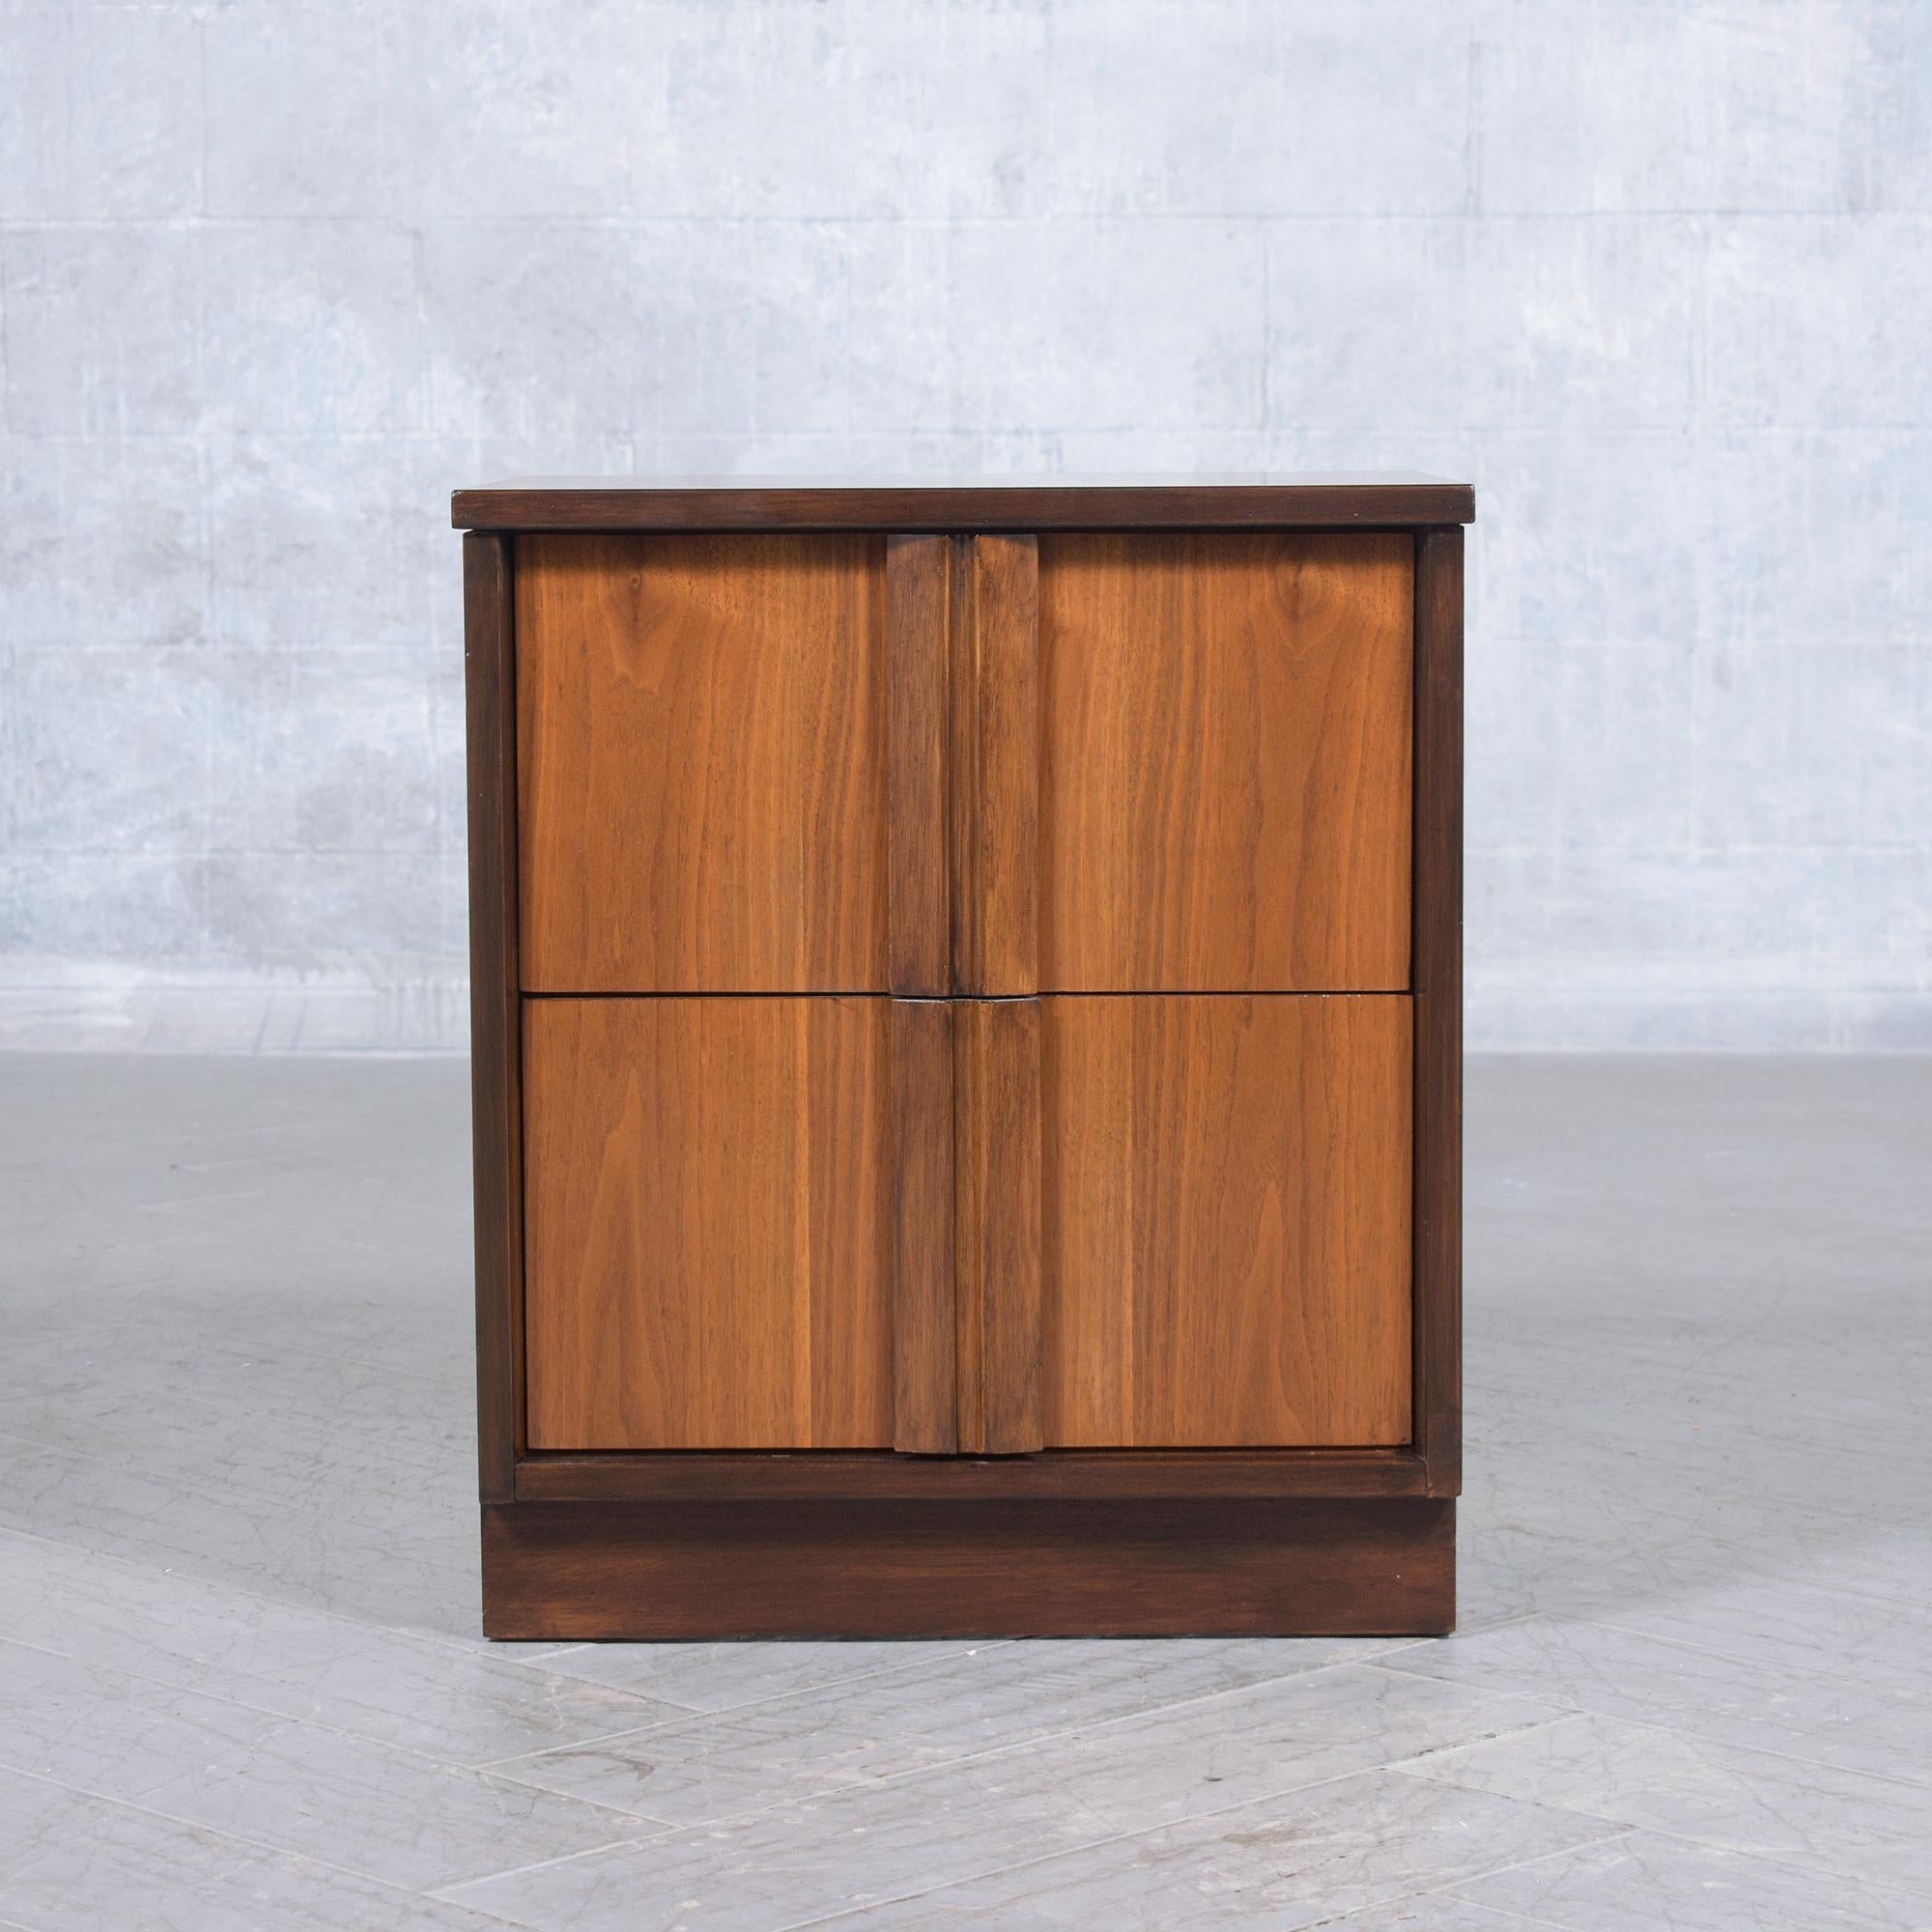 Restored 1960s Modern Walnut Nightstand: Dual-Tone with Unique Carved Handle For Sale